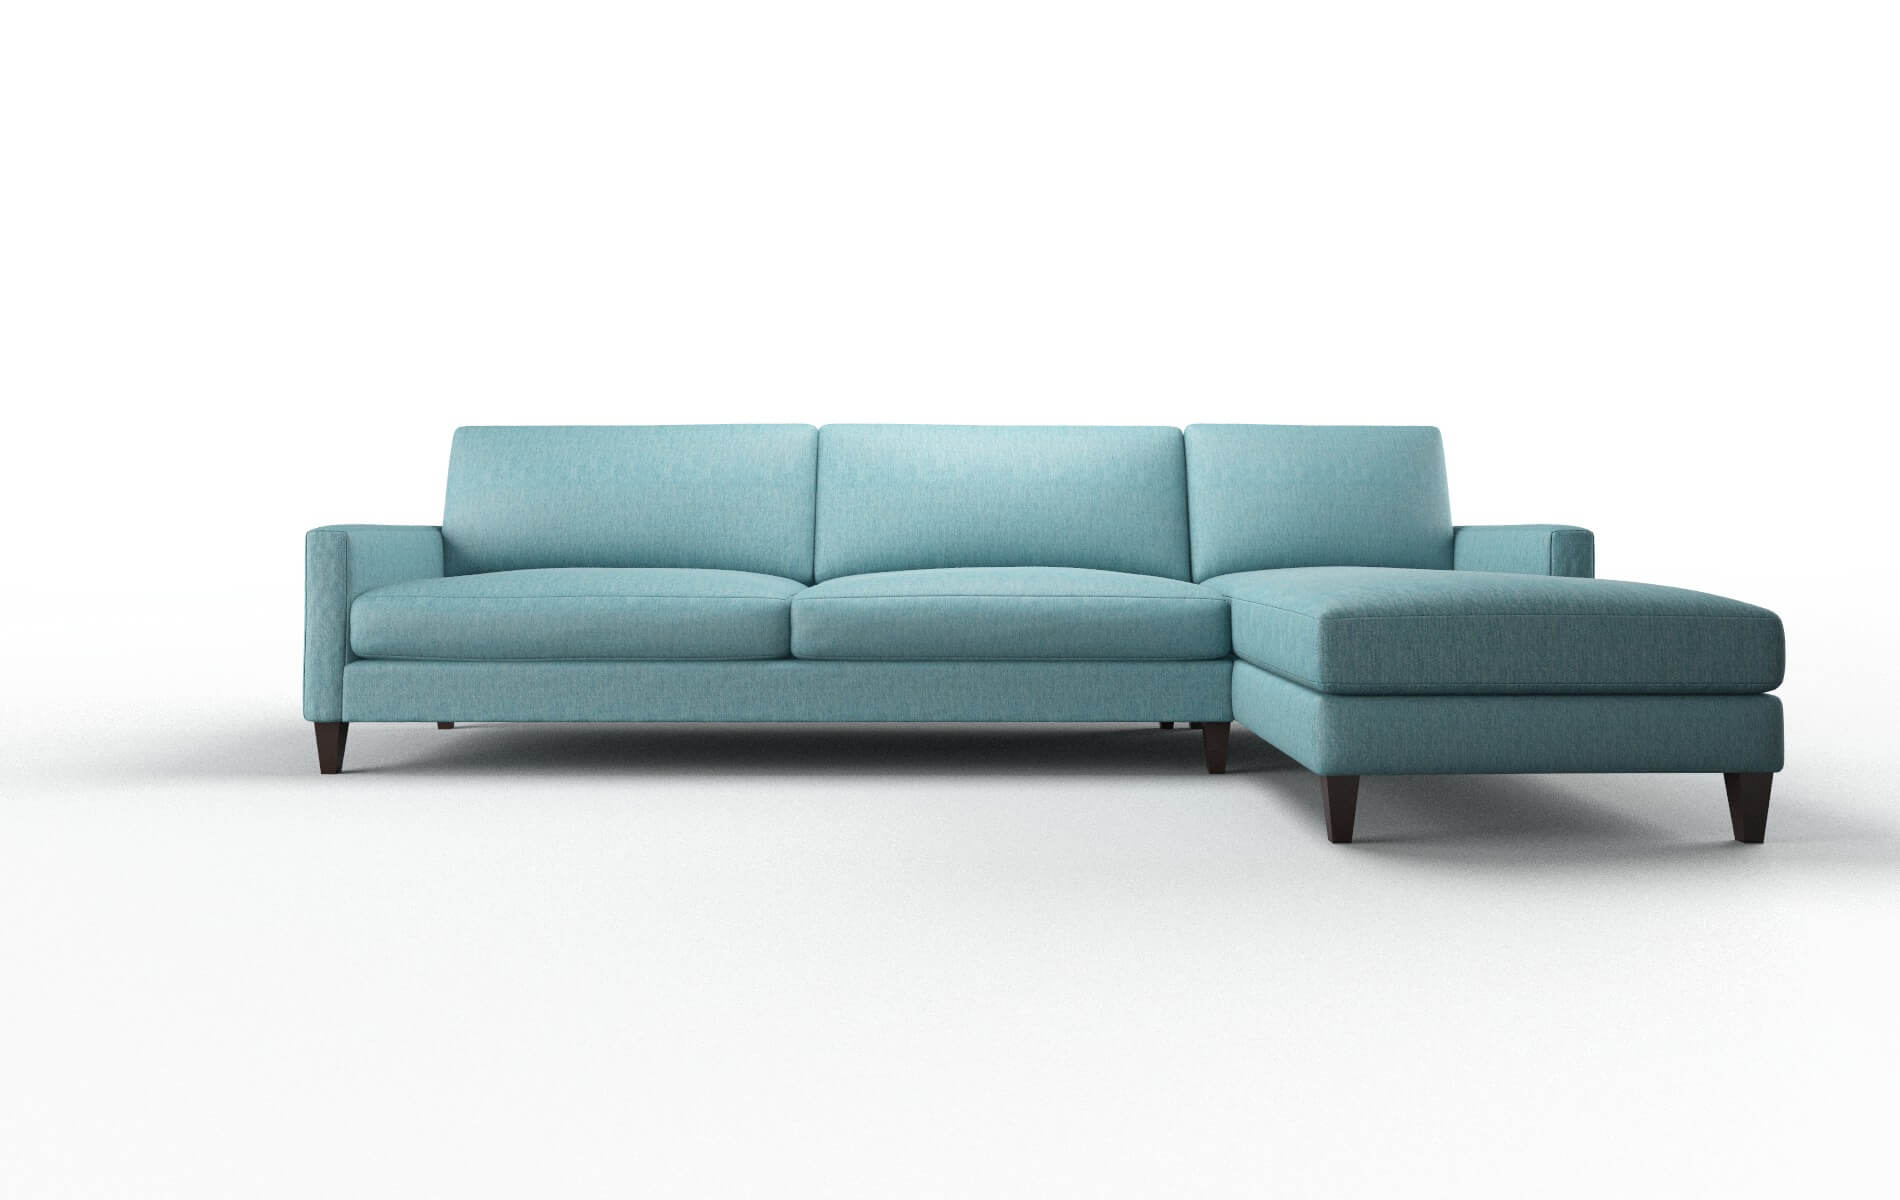 Cannes Cosmo Turquoise chair espresso legs